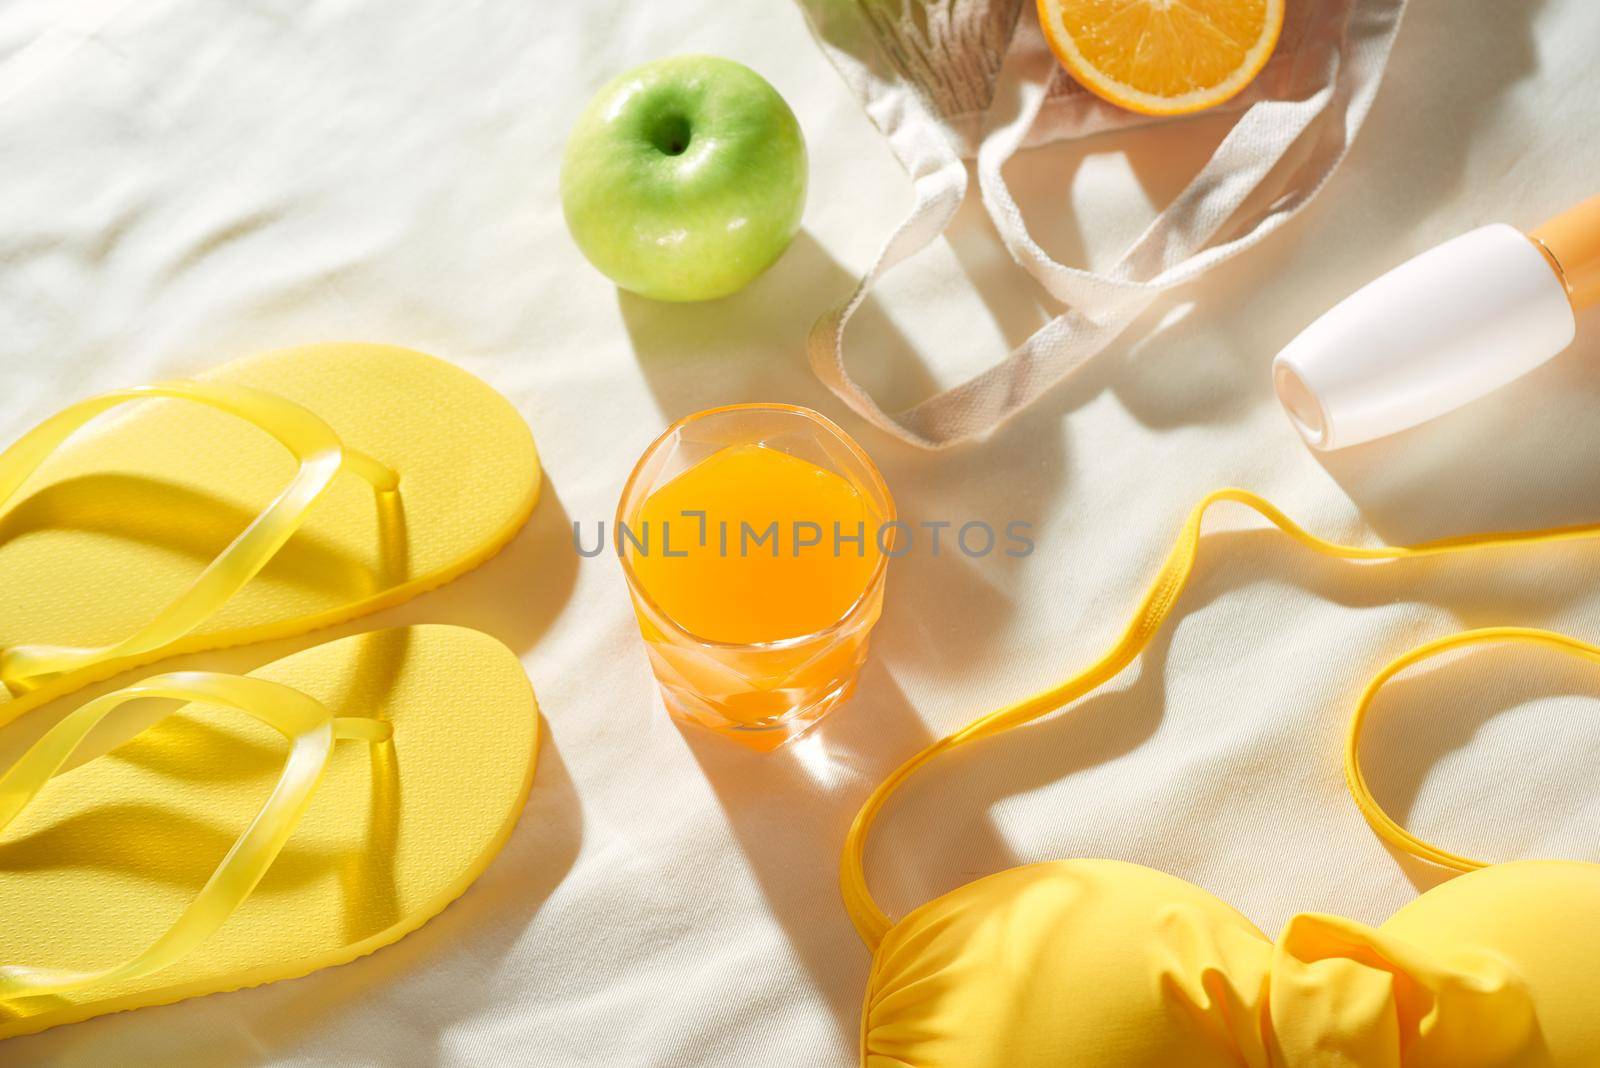 Summertime picnic on white background with fruit bag, flip-flop, sin cream and juice, flat lay